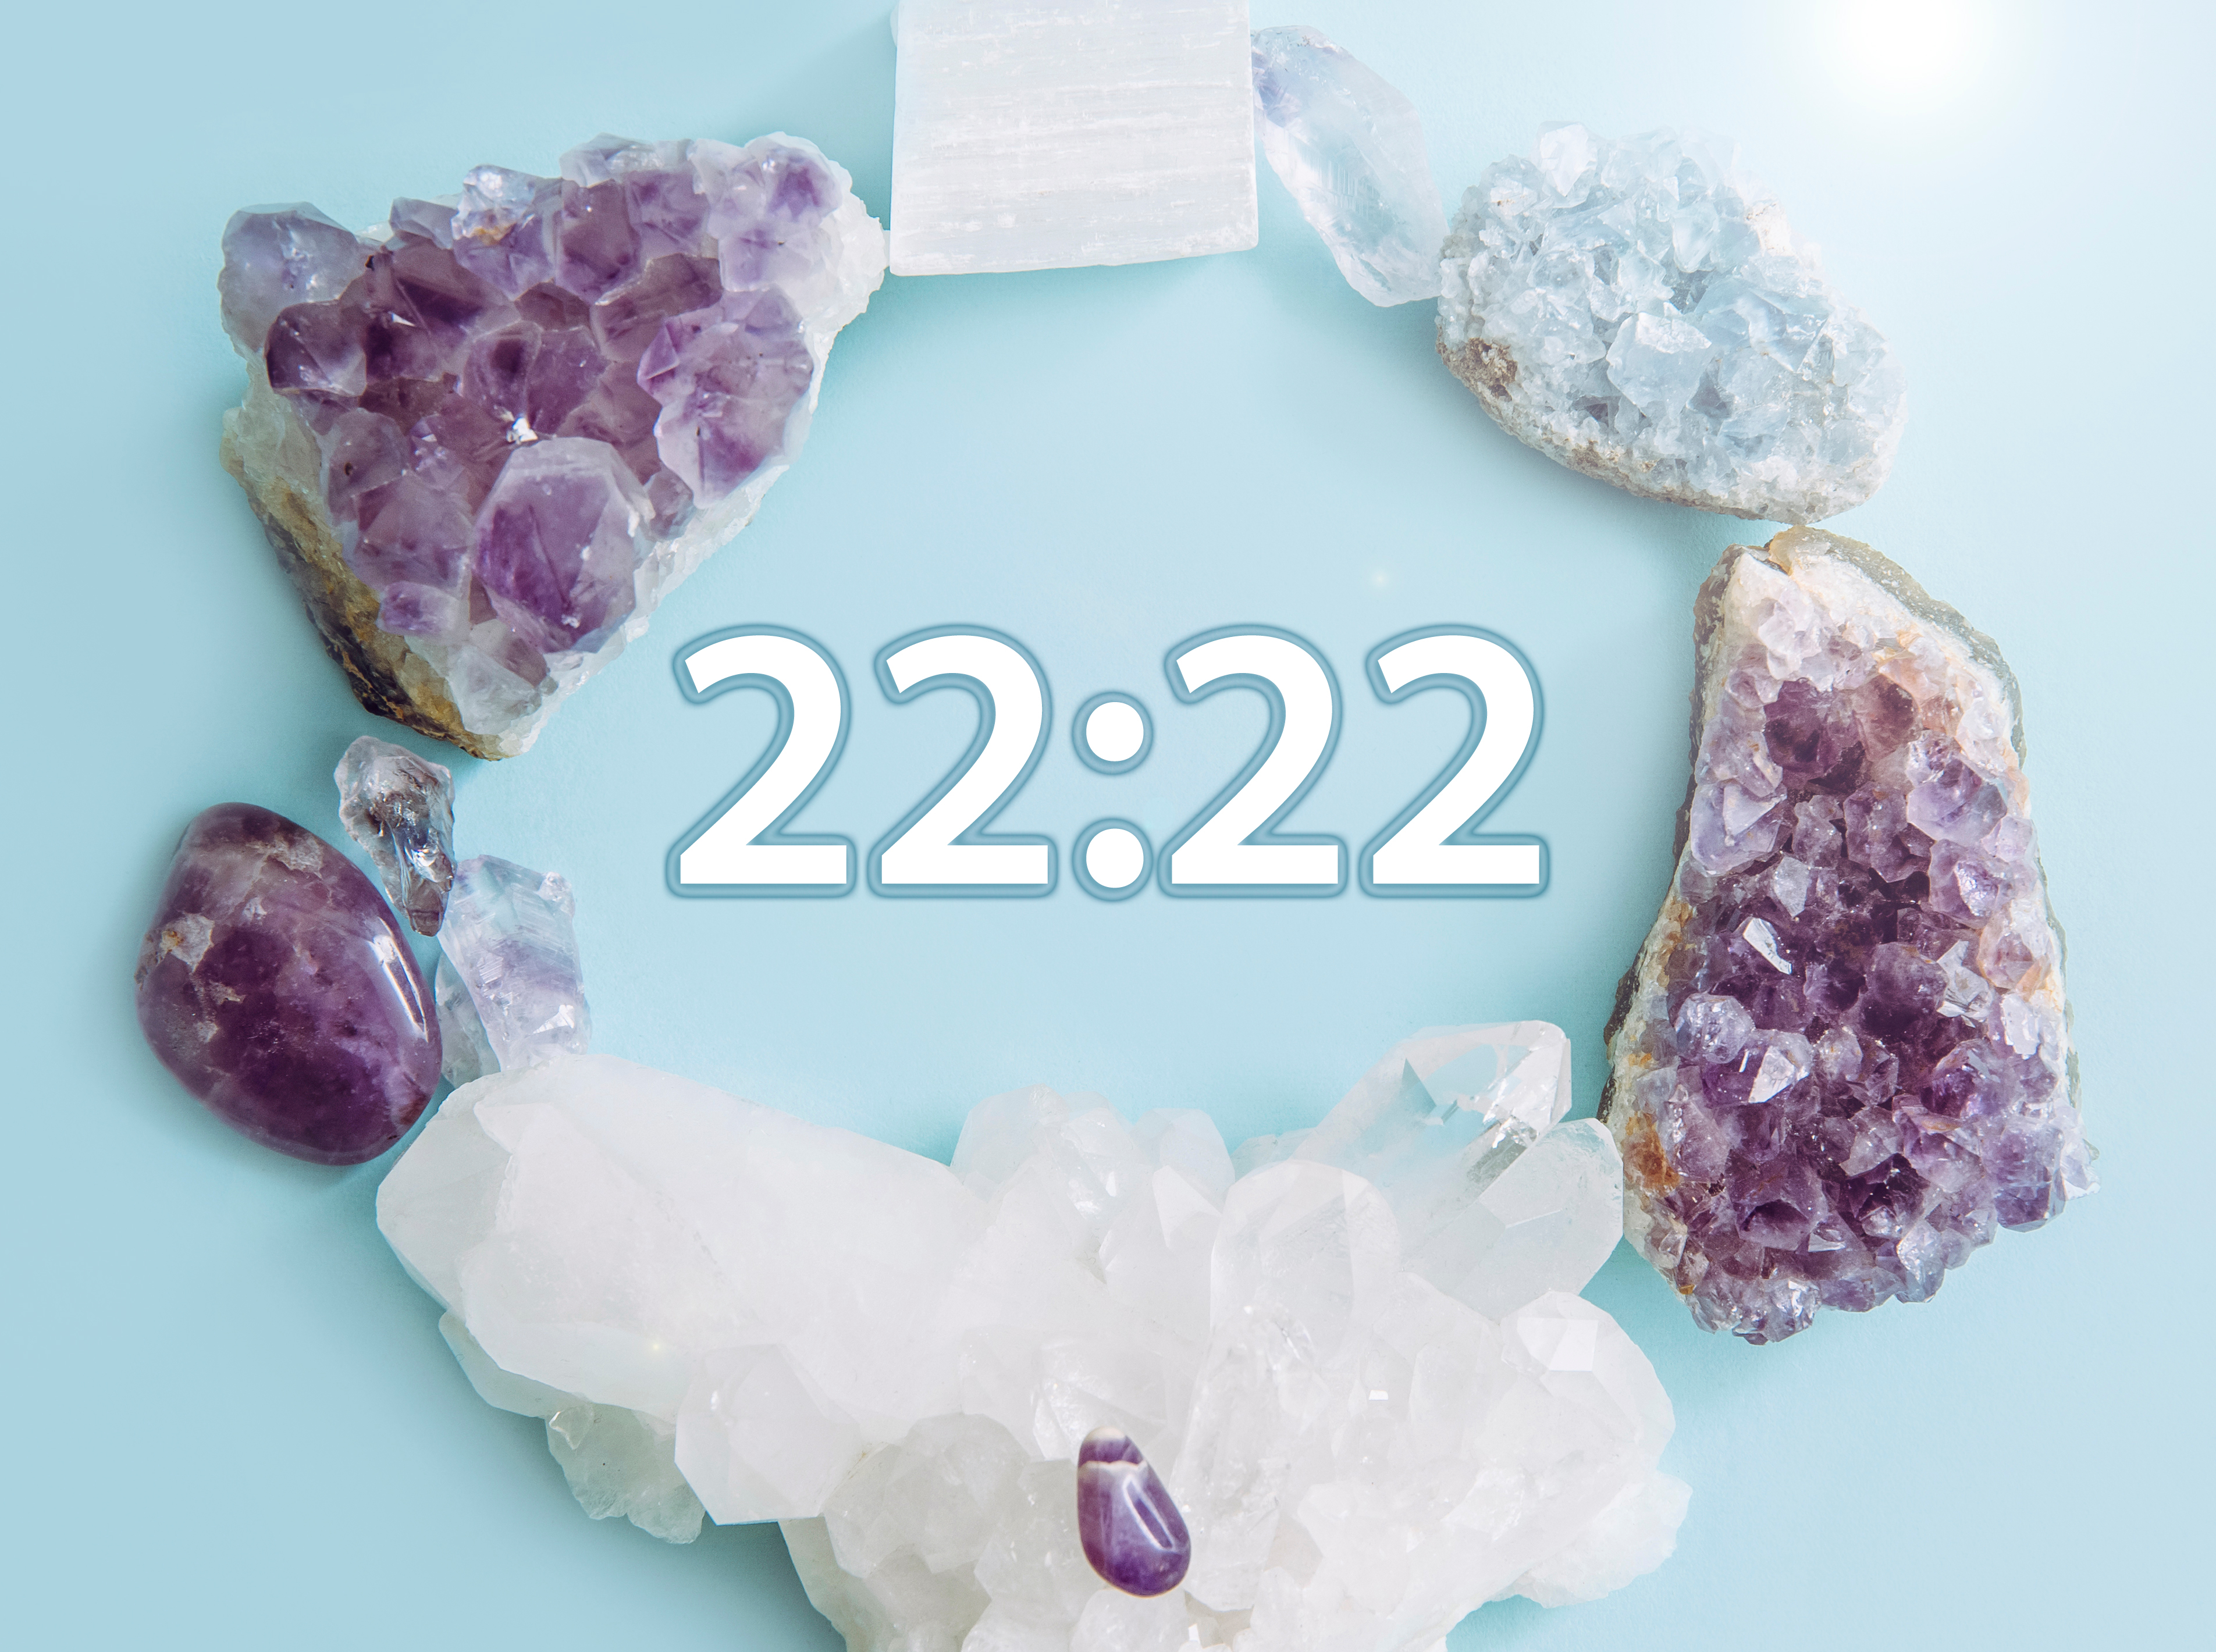 A variety of crystals placed in a circle with '22:22' written in the middle